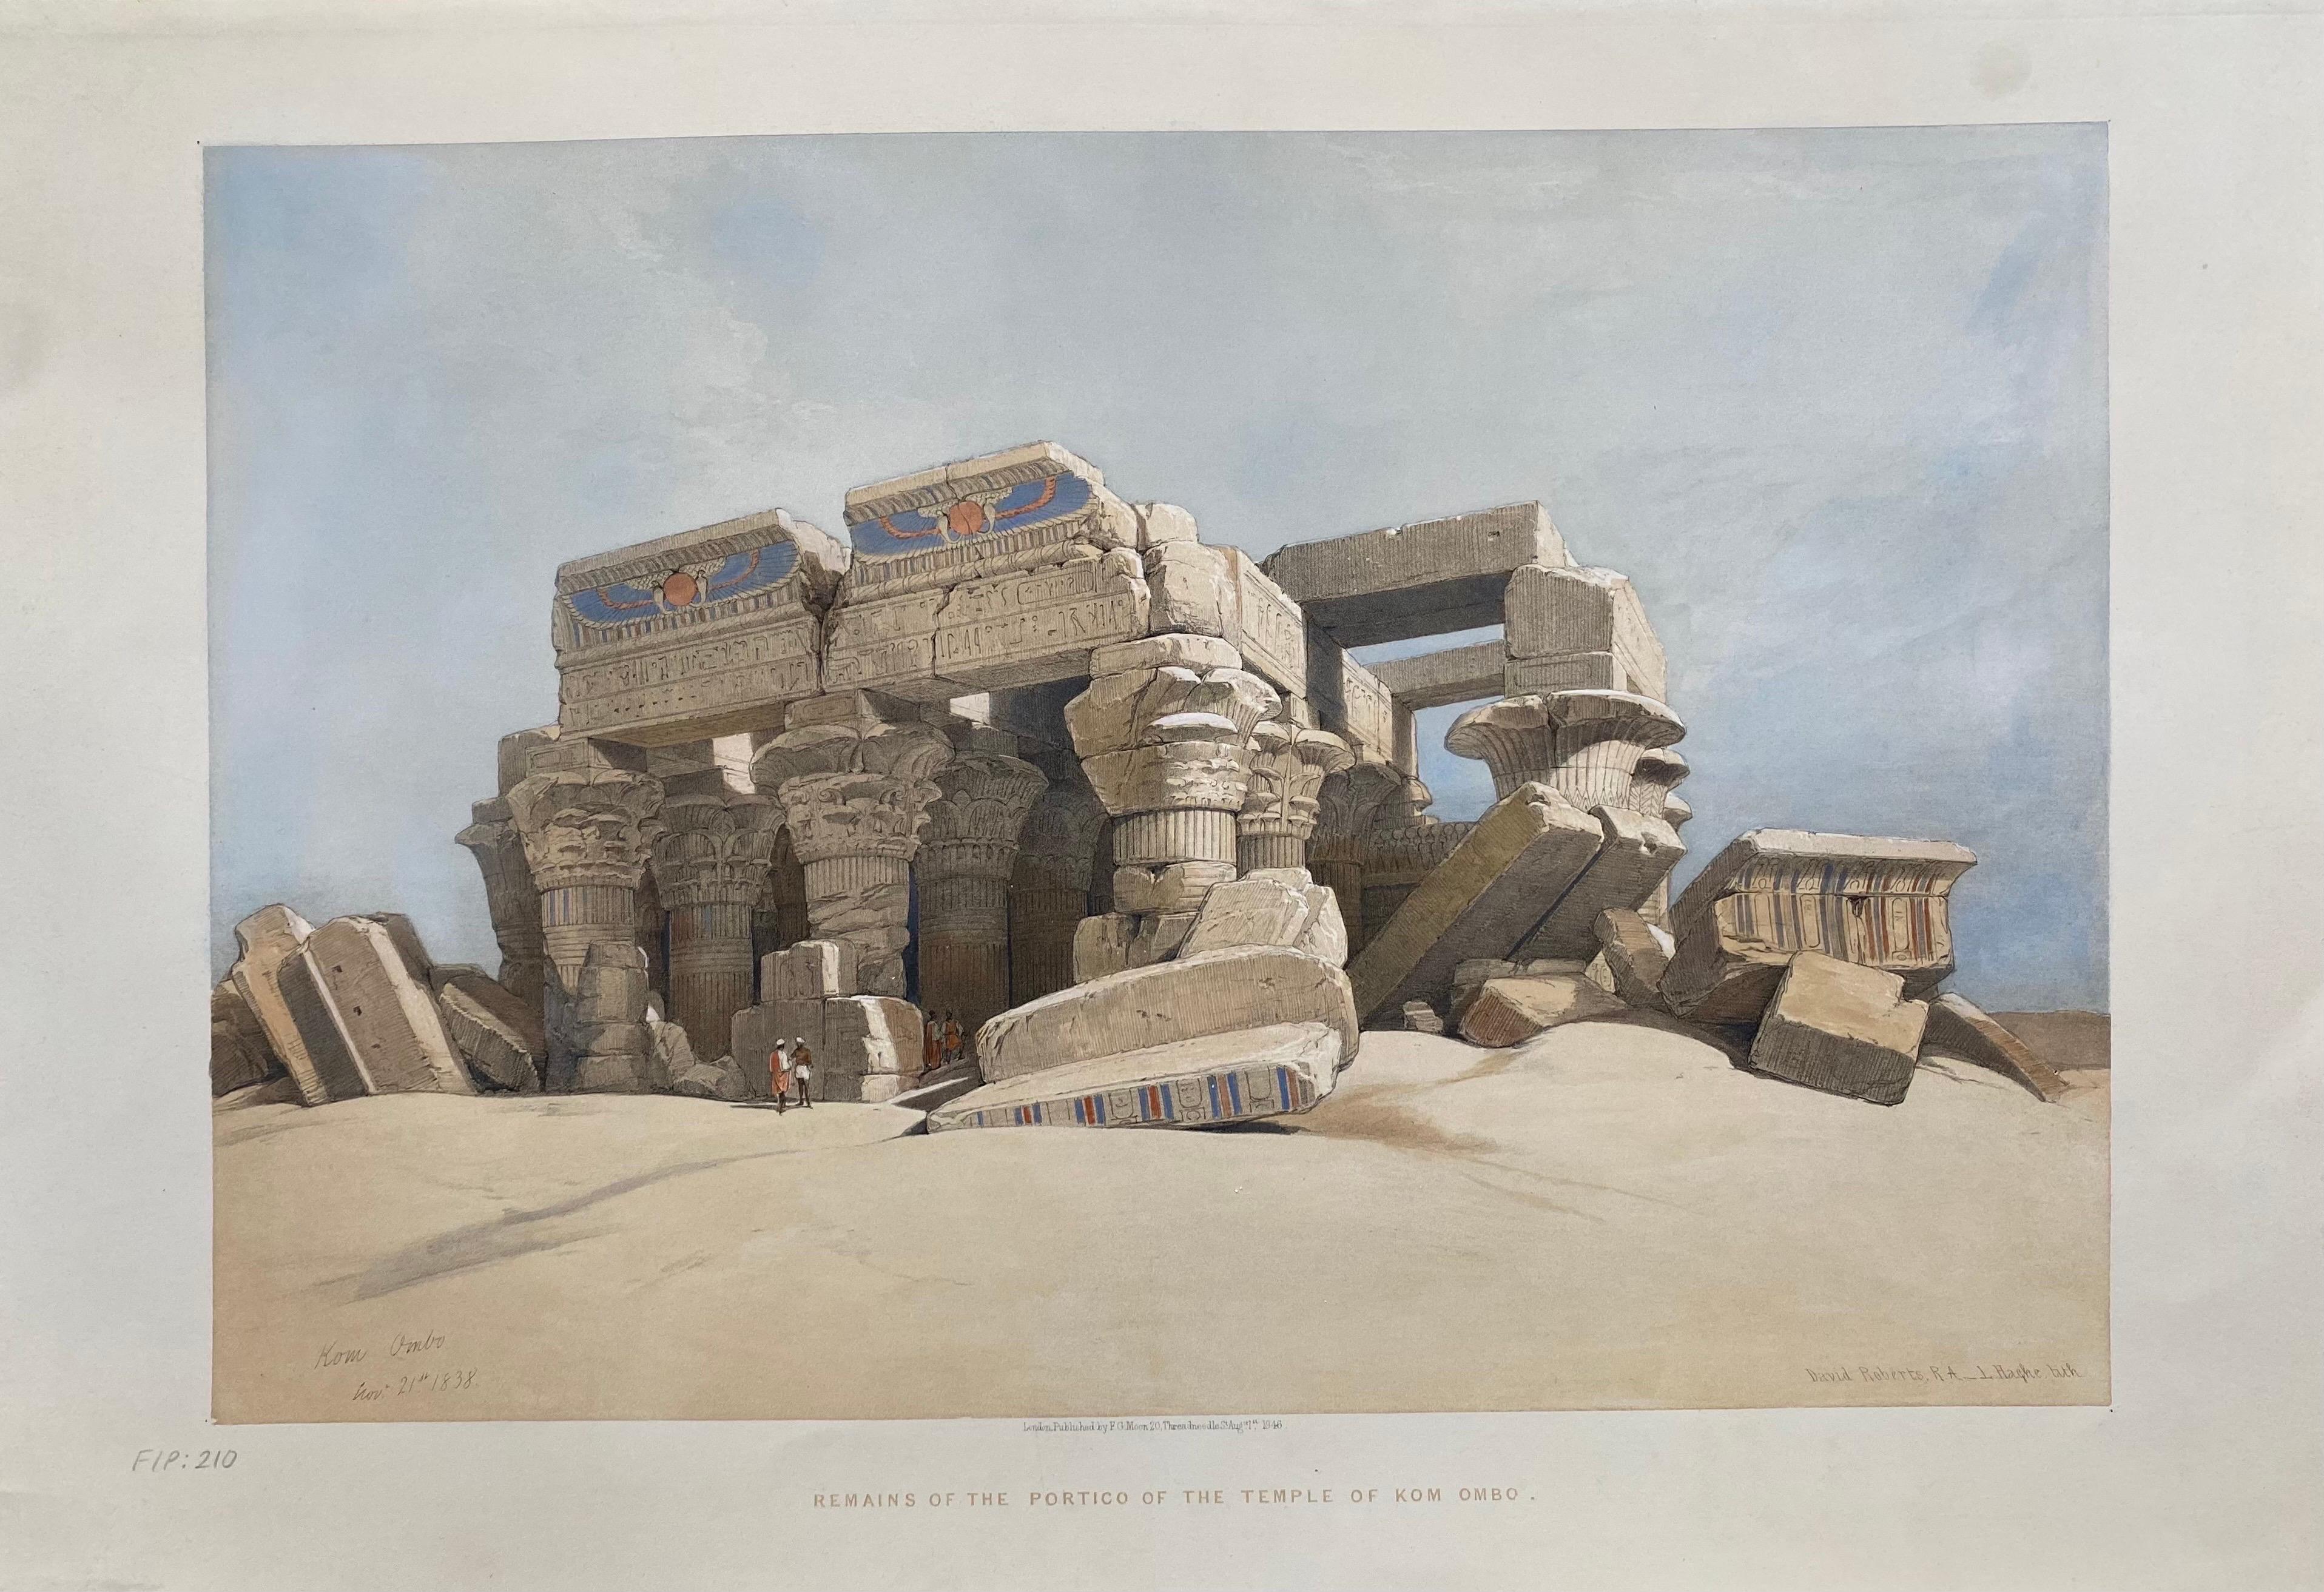 David Roberts
1796 - 1864
Kom Ombo
First Edition lithograph
Full plate: 210
Presented in an acid free mount